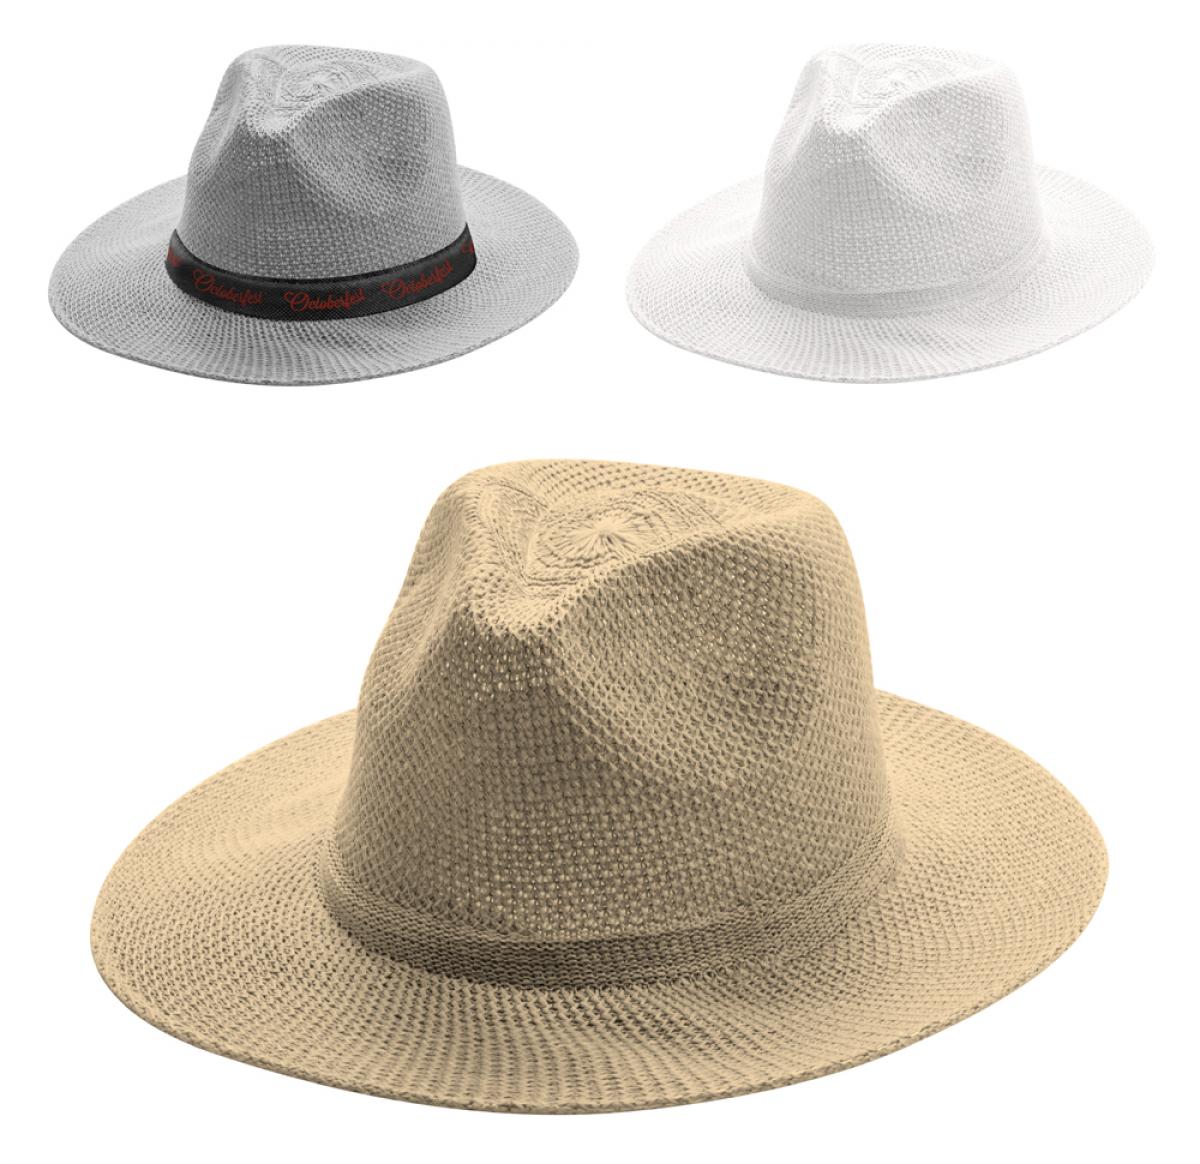 Printed Stetson Hats - Hindyp